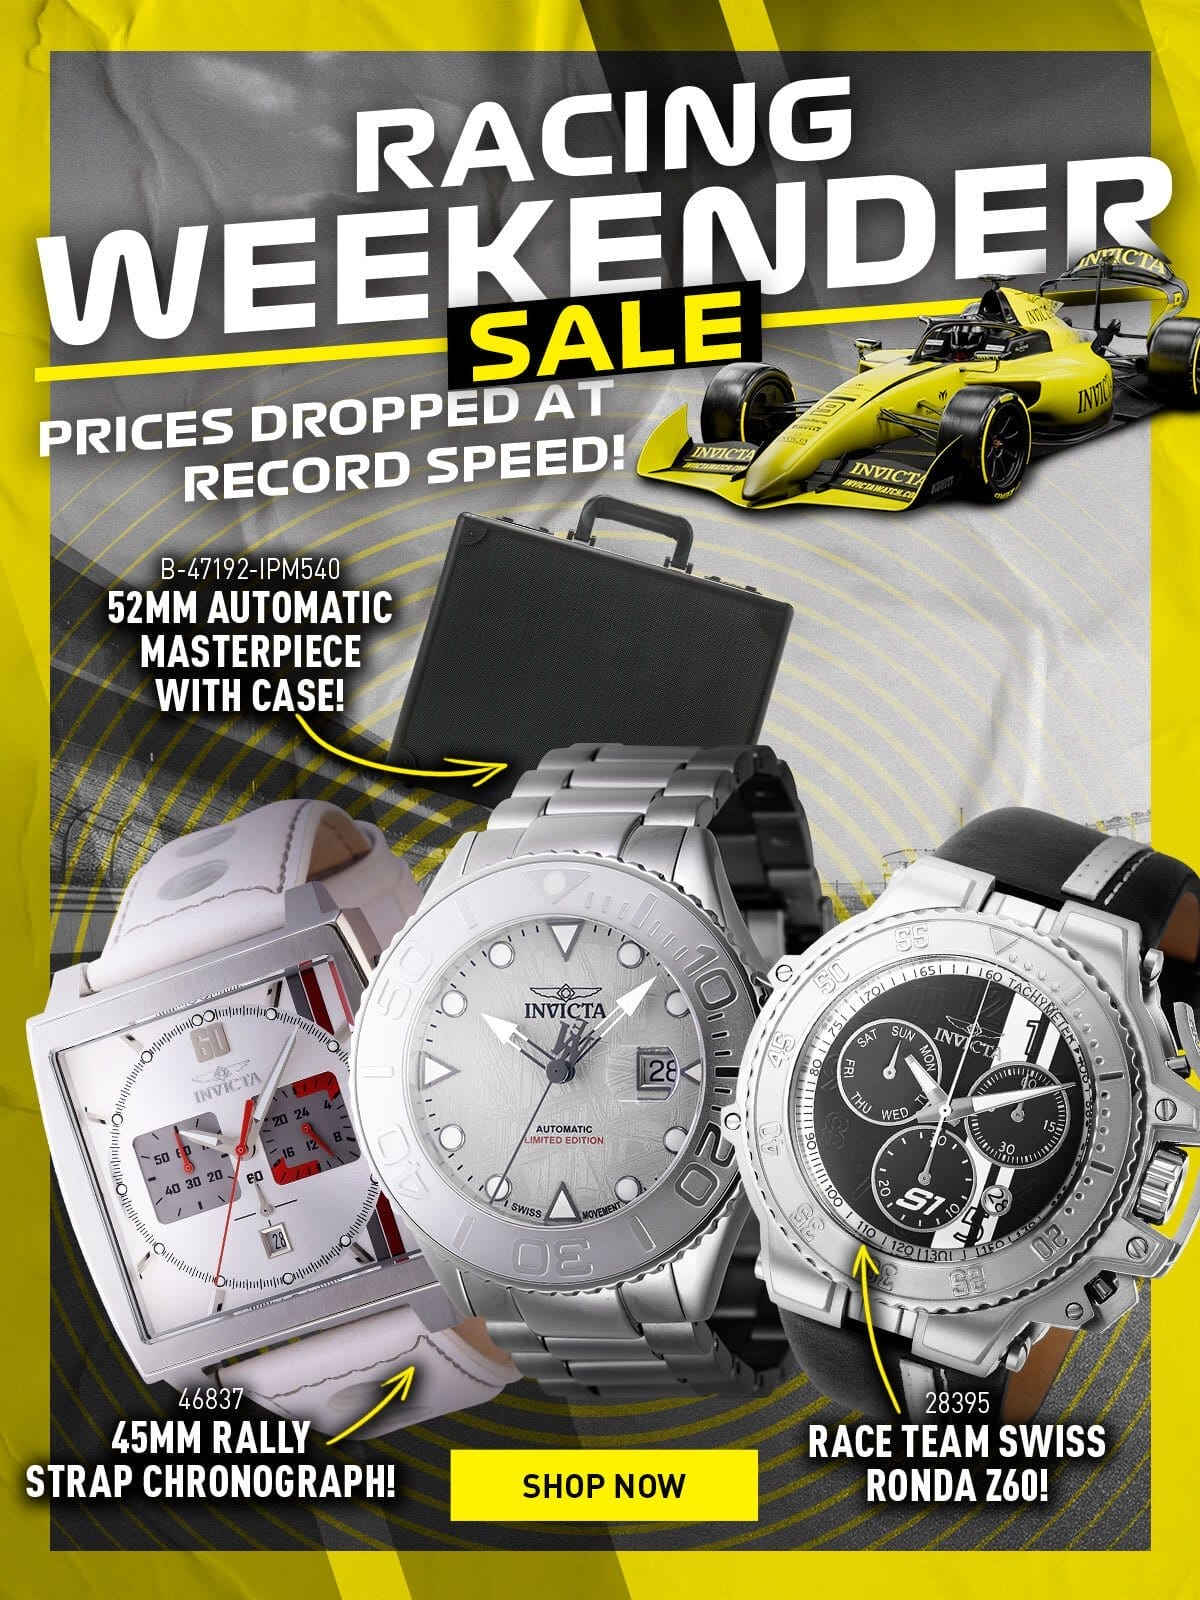 Racing Weekender Sale - Prices dropped at record speed!